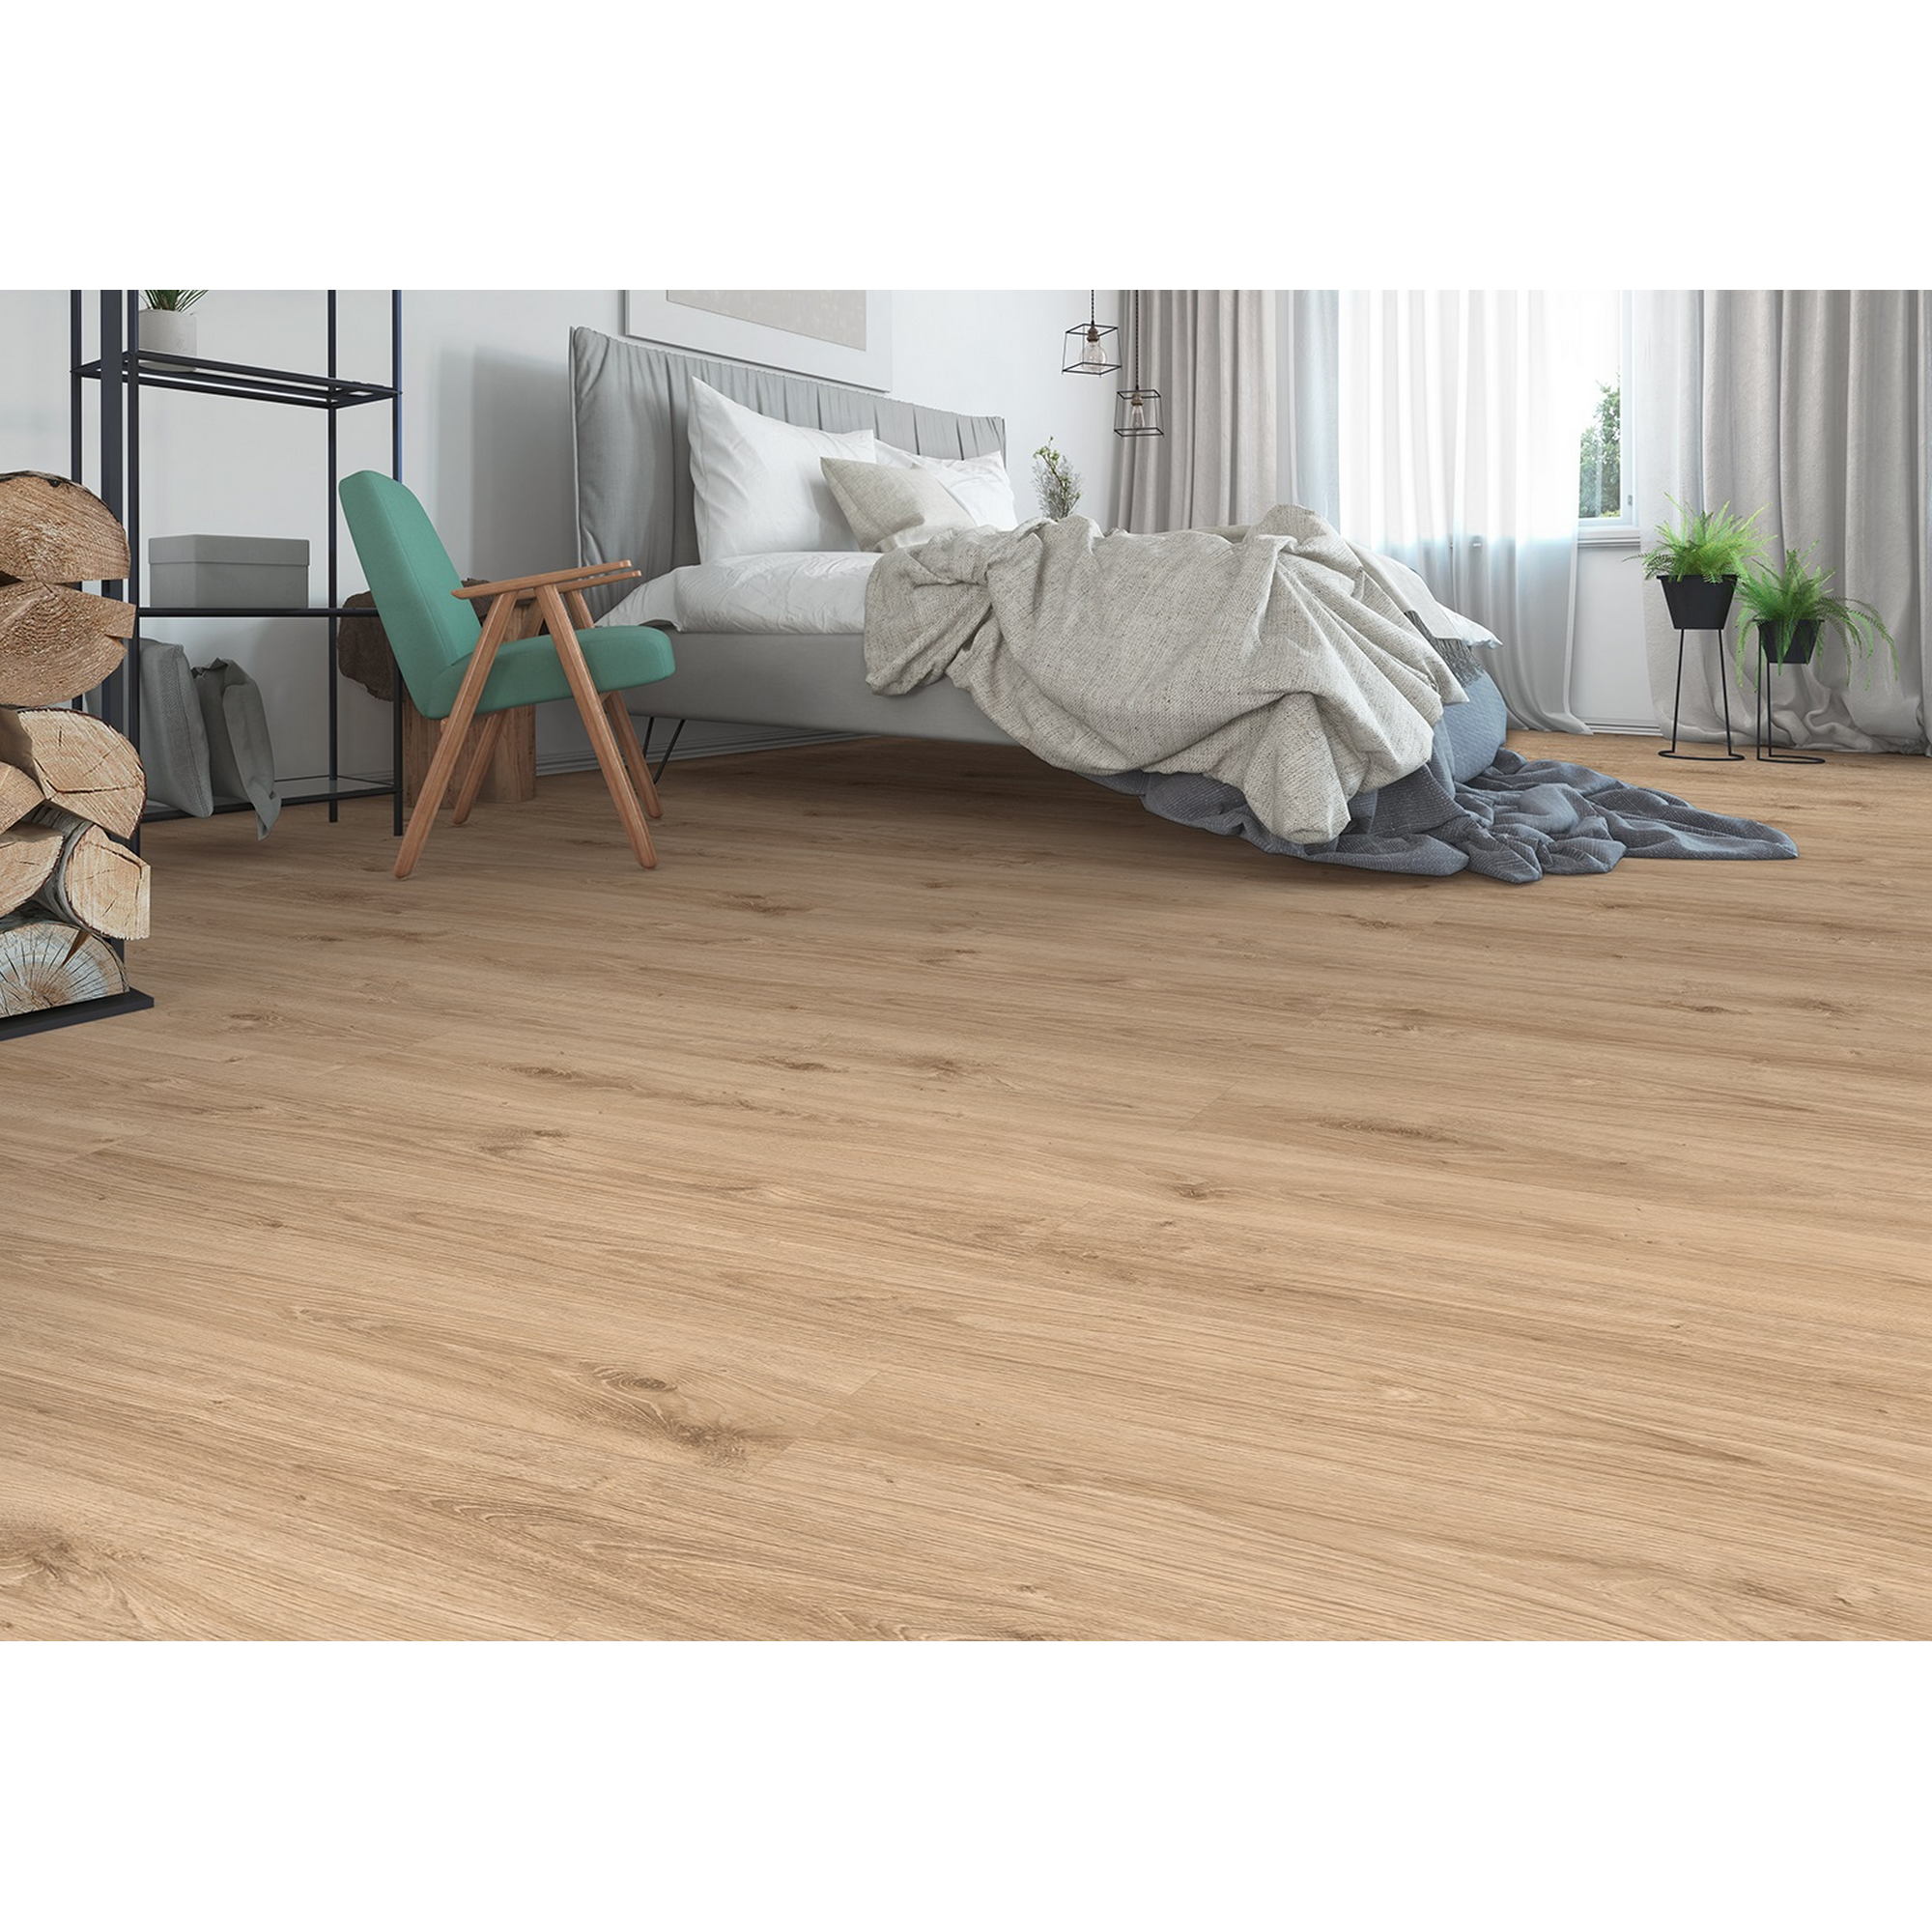 Laminat '832-0' Eiche beige hell 8 mm + product picture